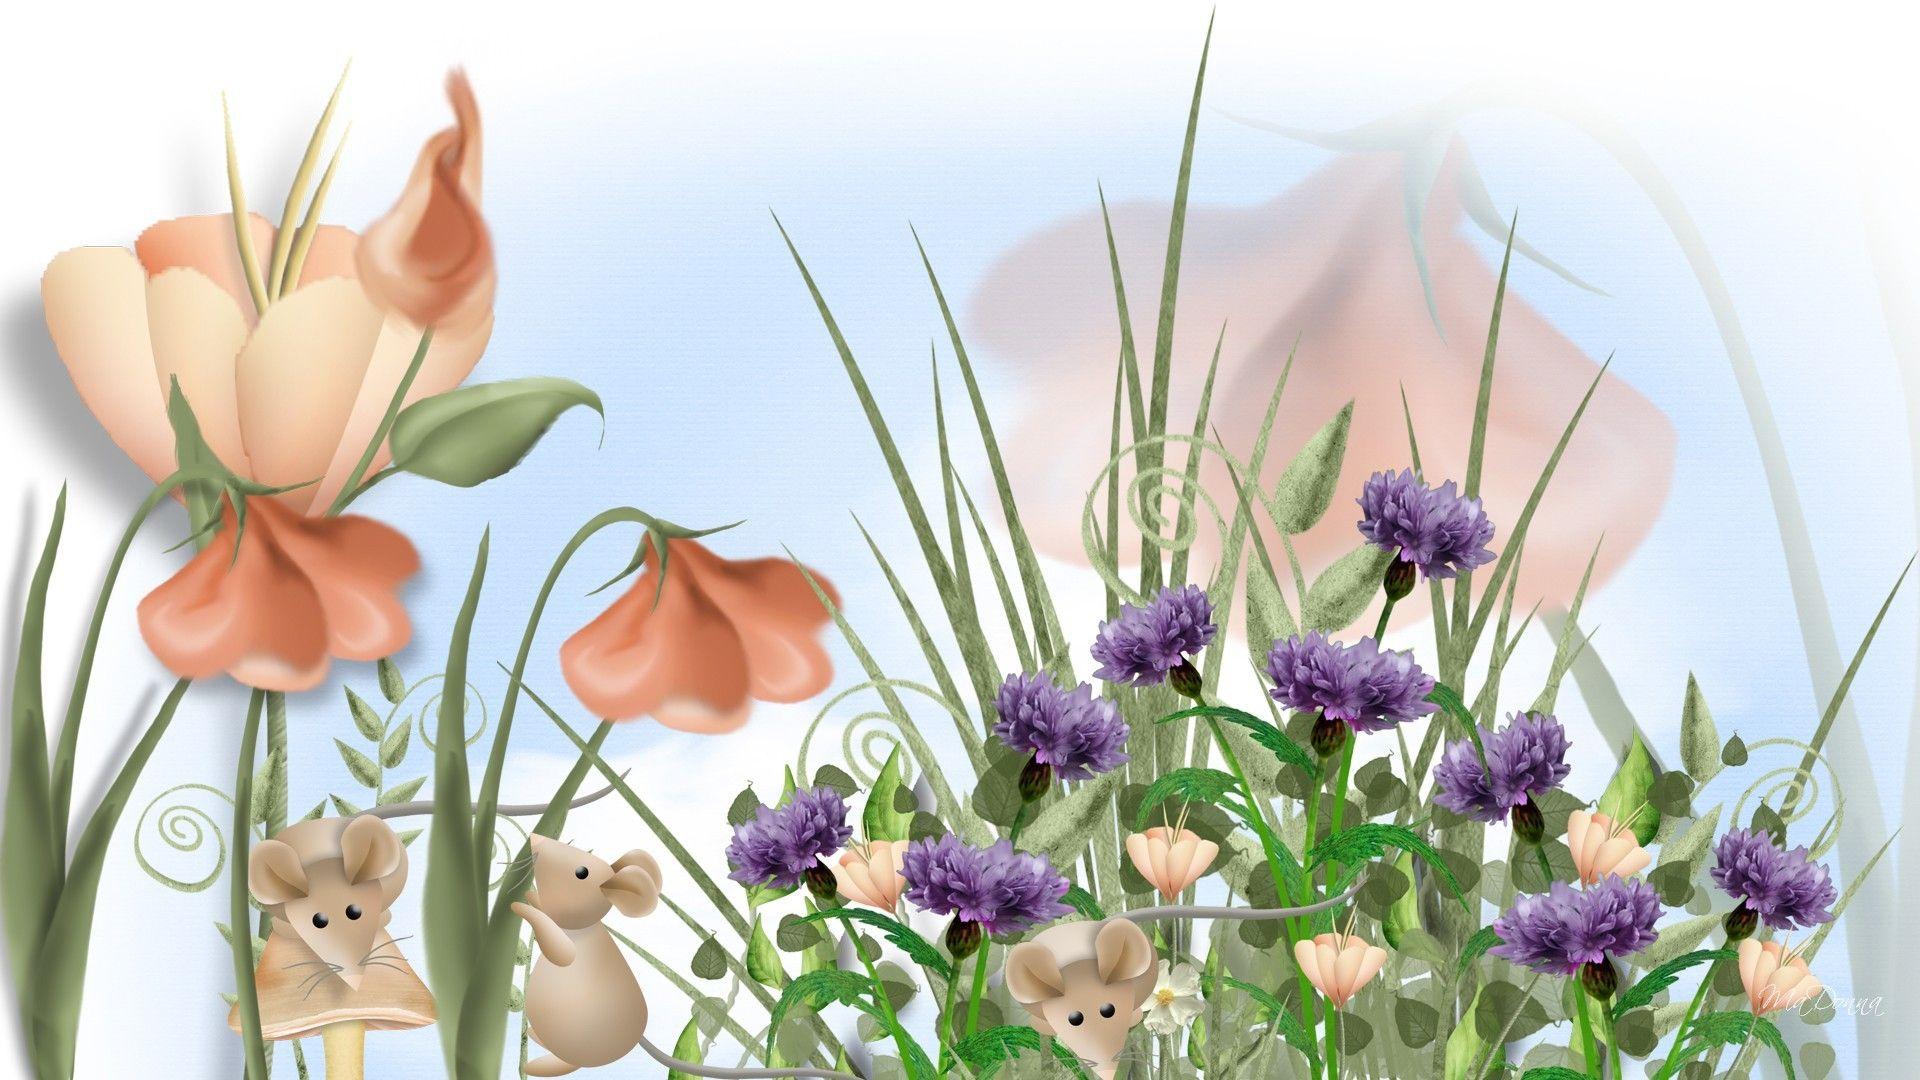 Flowers: Spring Persona Mouse Mice Cute Summer Fairyland Fantasy